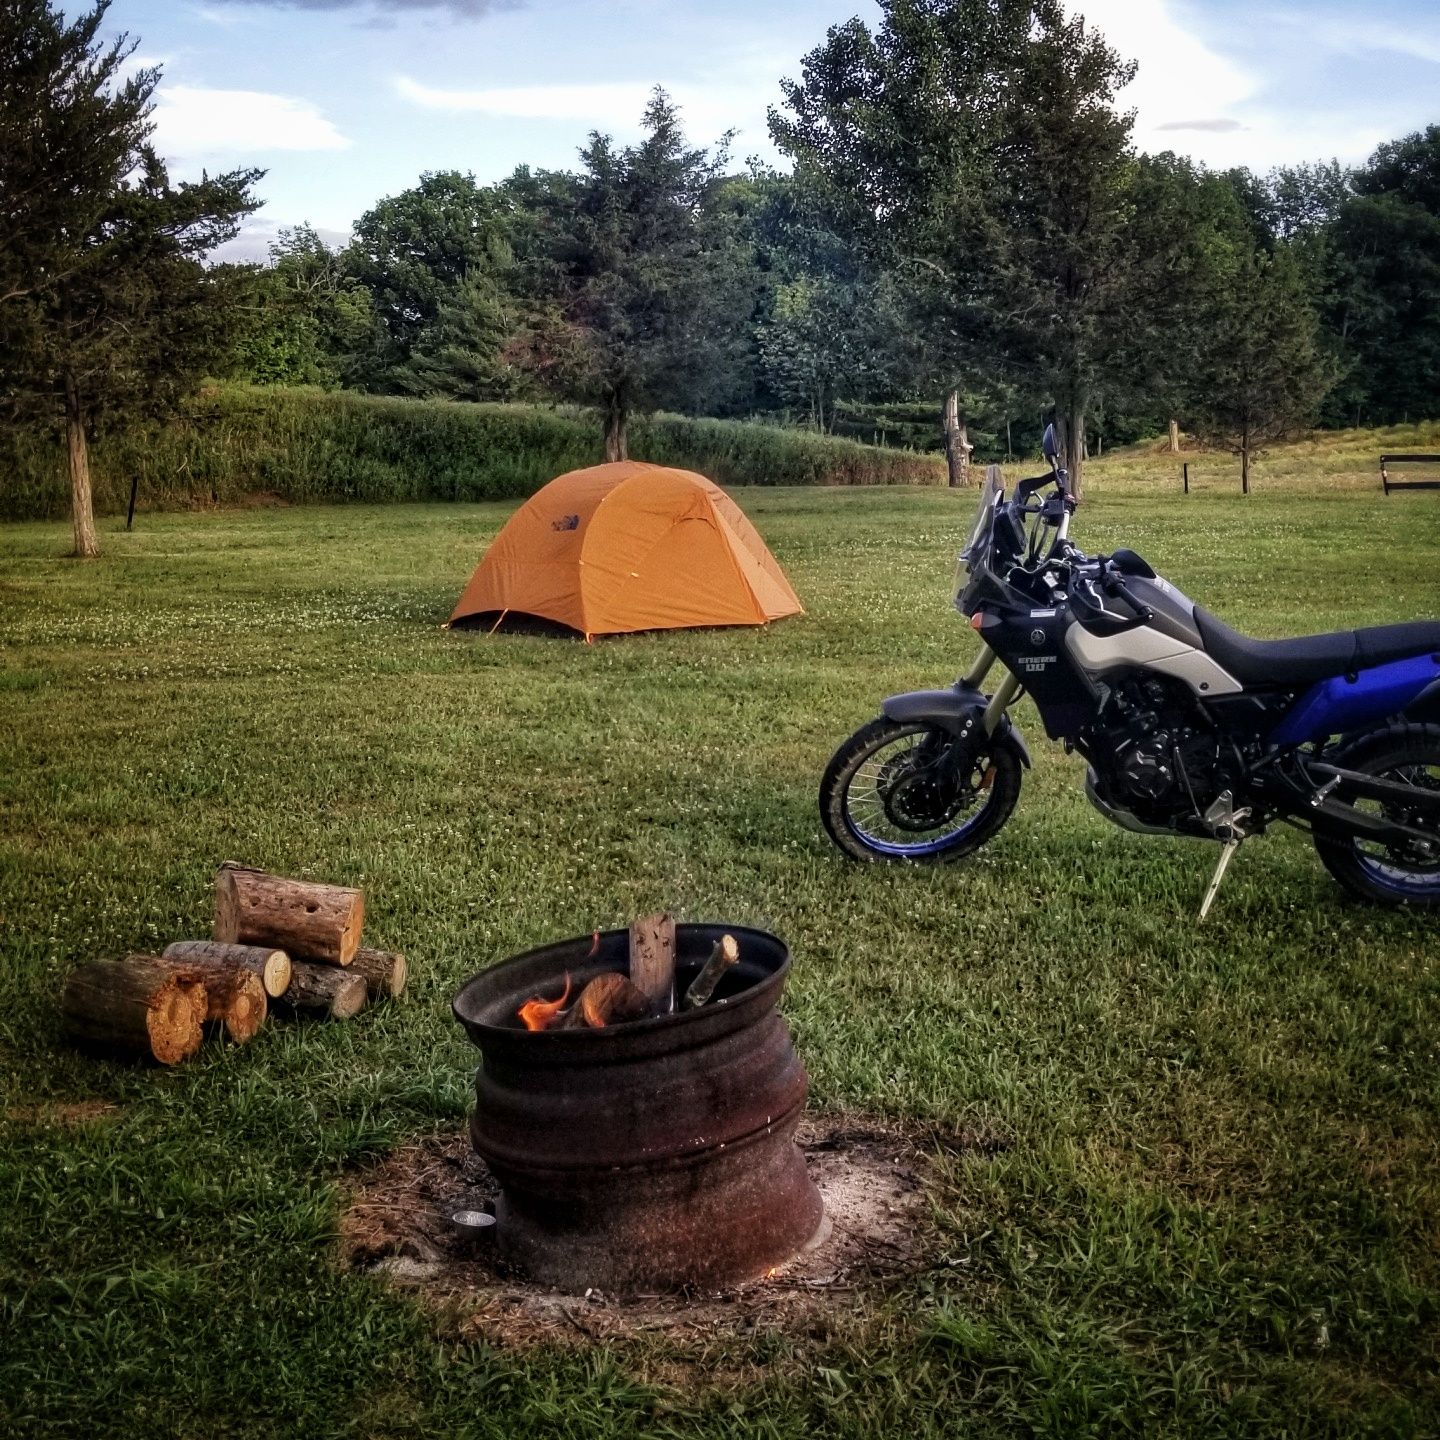 The Tenere 700 feels more at home at a campsite than in the city